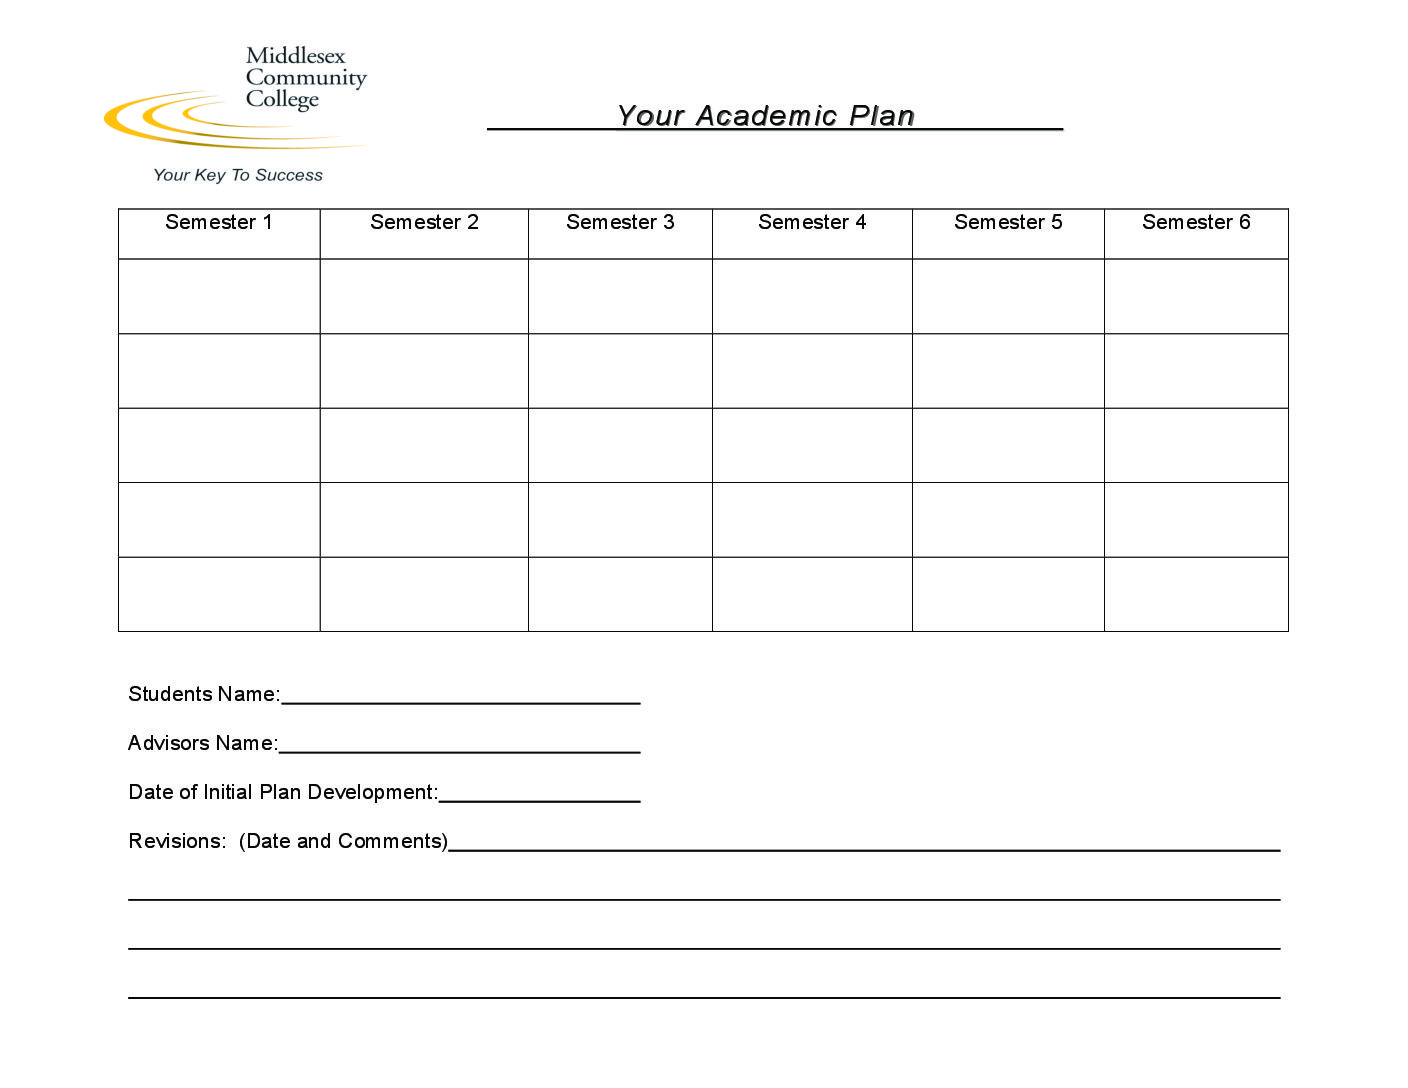 Academic Plan Worksheet Middlesex Community College CT